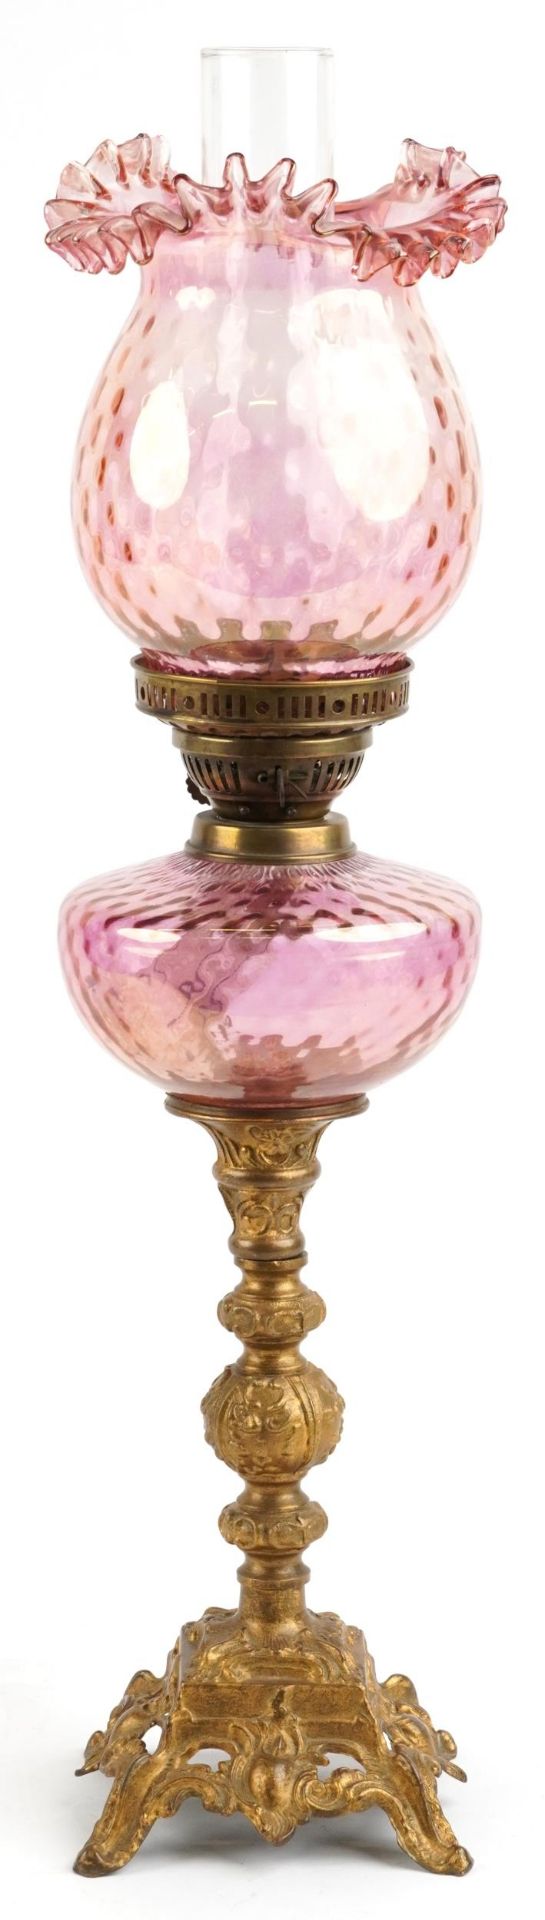 Ornate gilt painted oil lamp with iridescent cranberry glass shade and reservoir, 68.5cm high : - Image 2 of 3